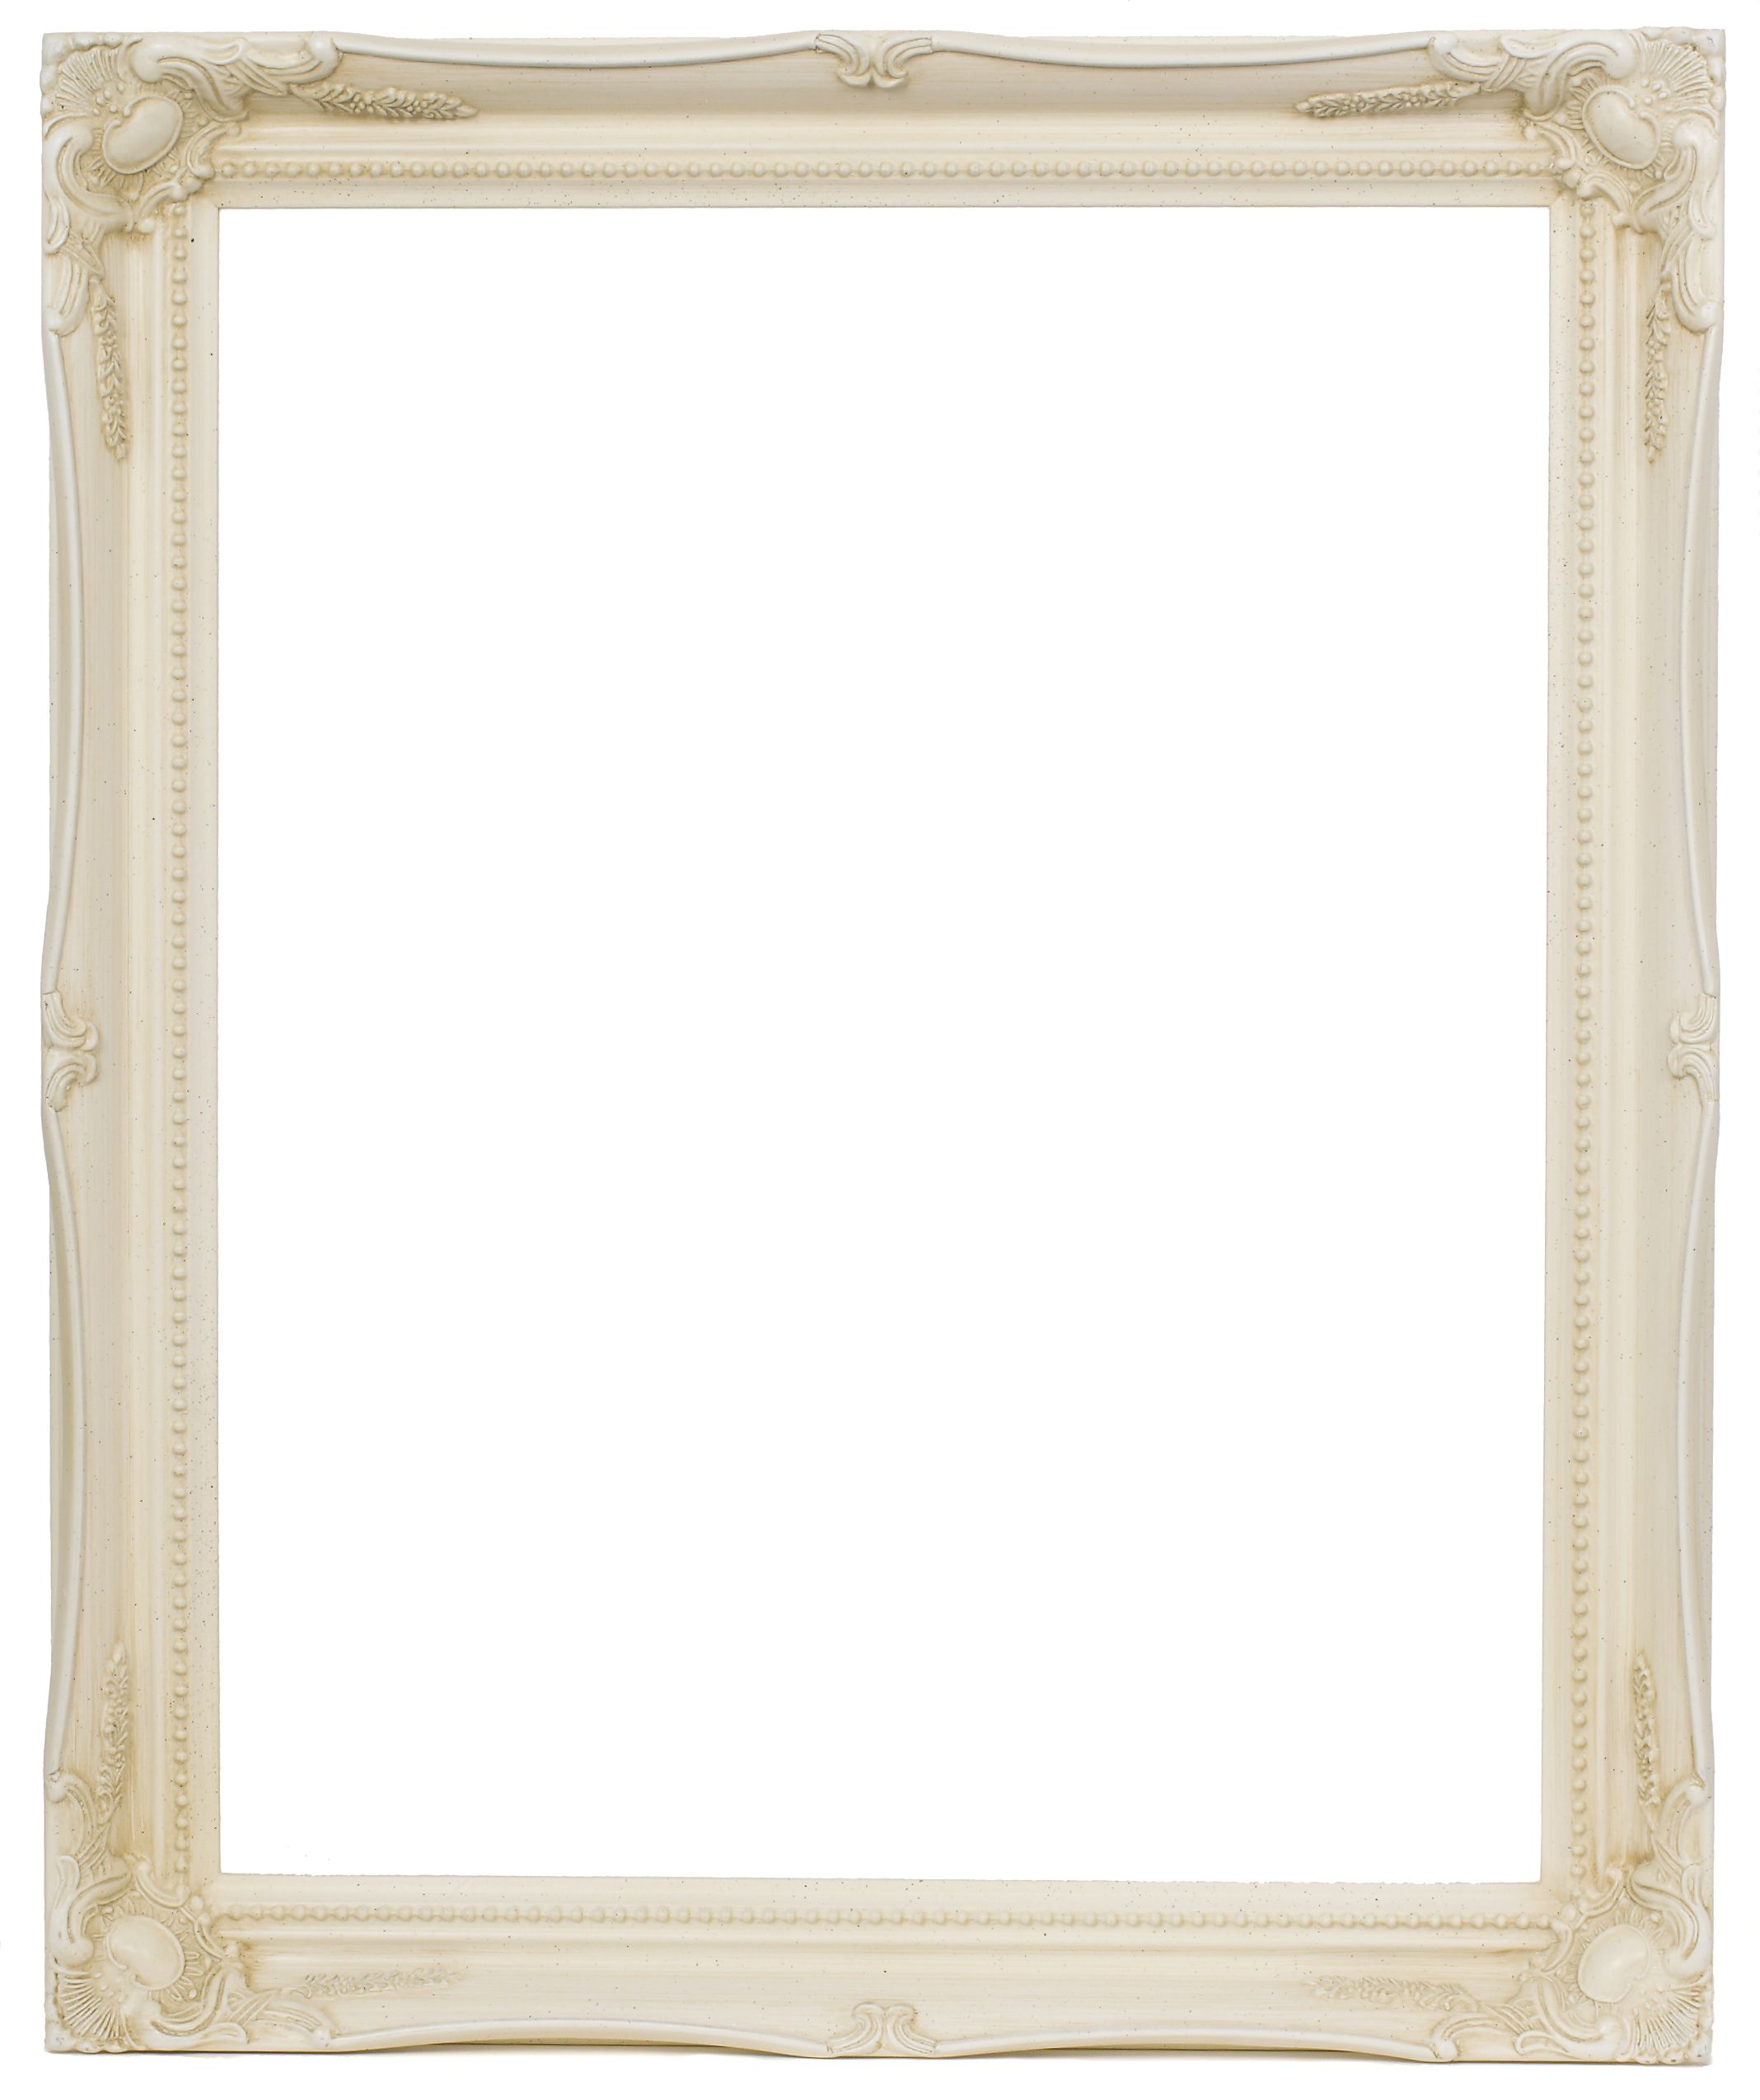 Swept Antique Effect Wood Frames 2 Empty or Plastic Glass Backing